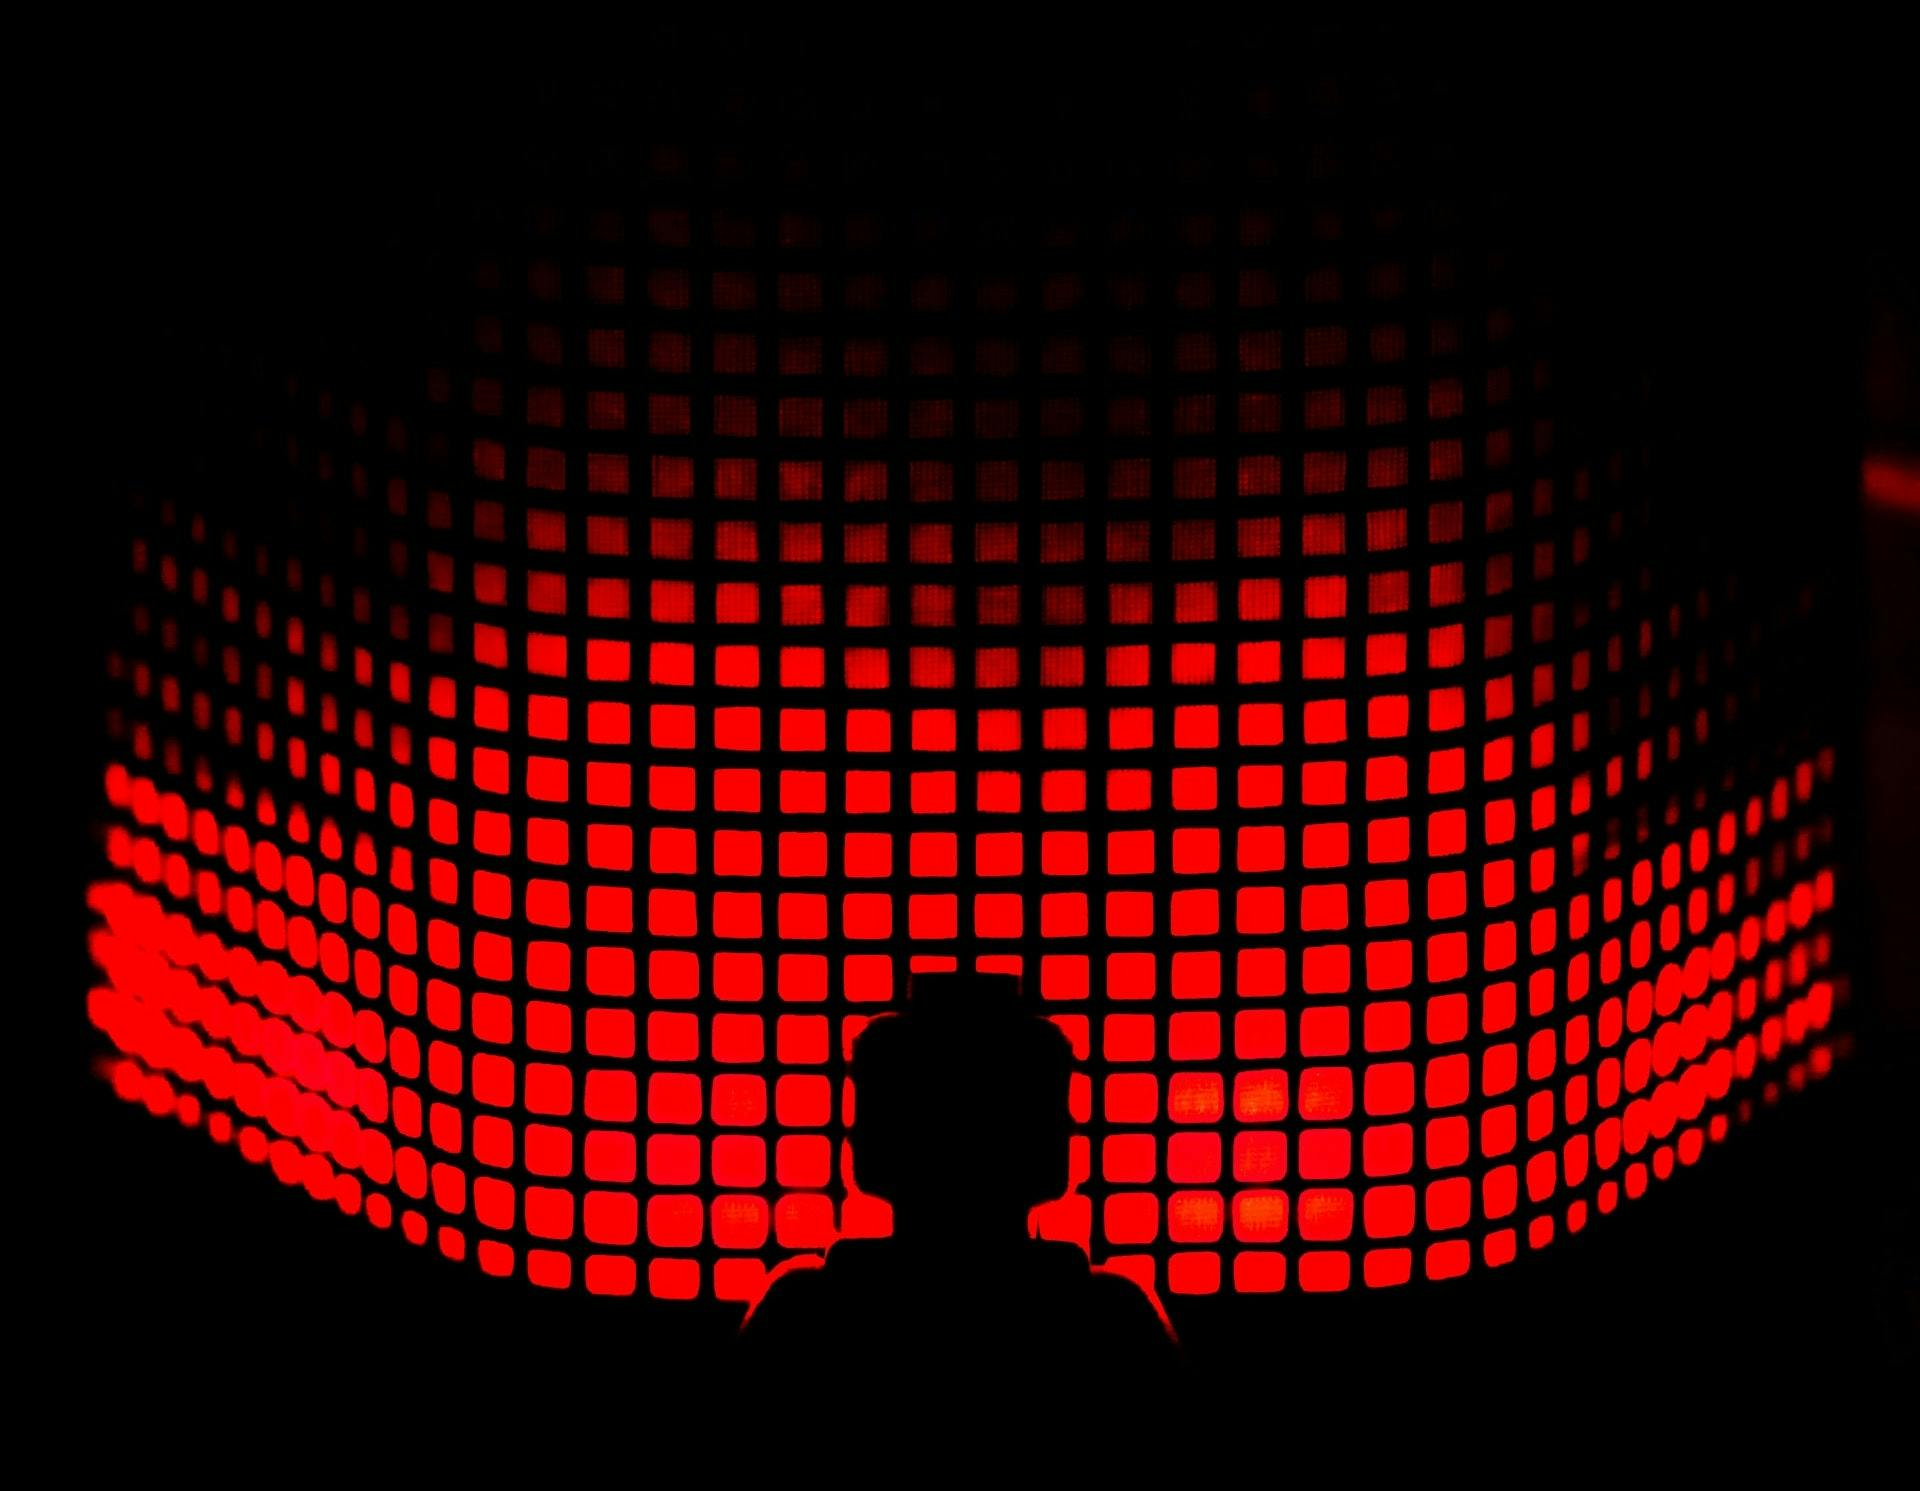 An abstract black silhouette of a person in front of a grid of red squares